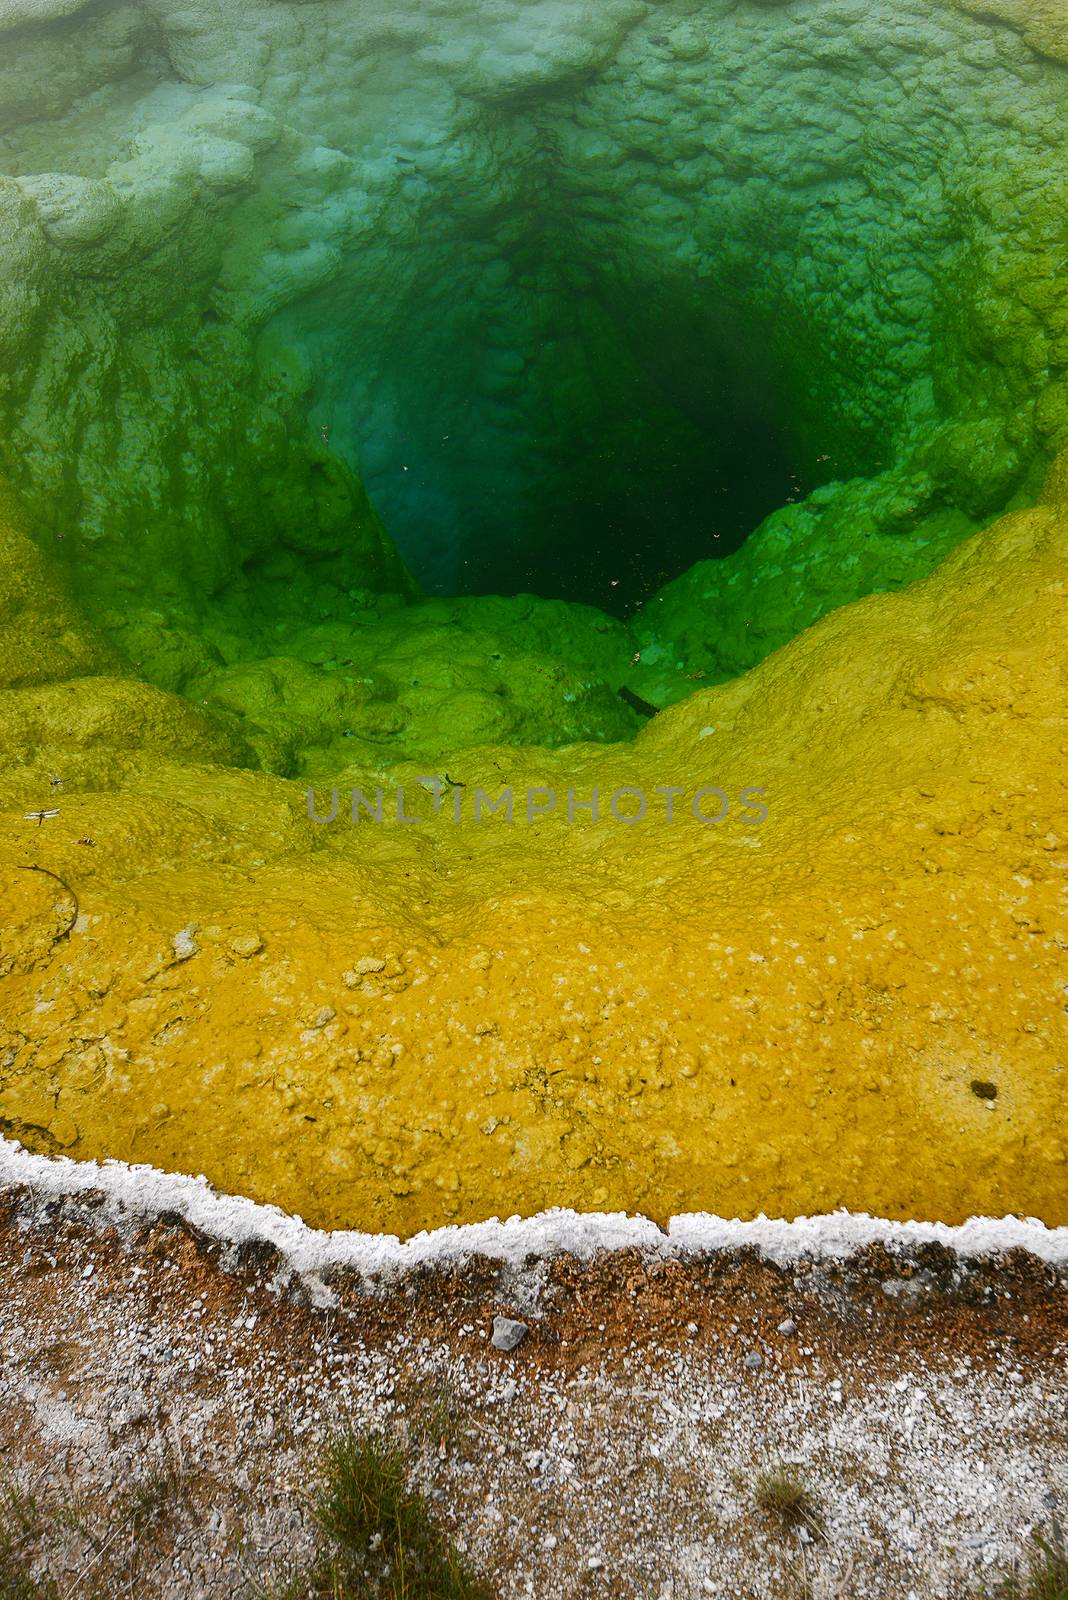 Morning Glory Pool is a hot spring inside Yellowstone National Park, Wyoming